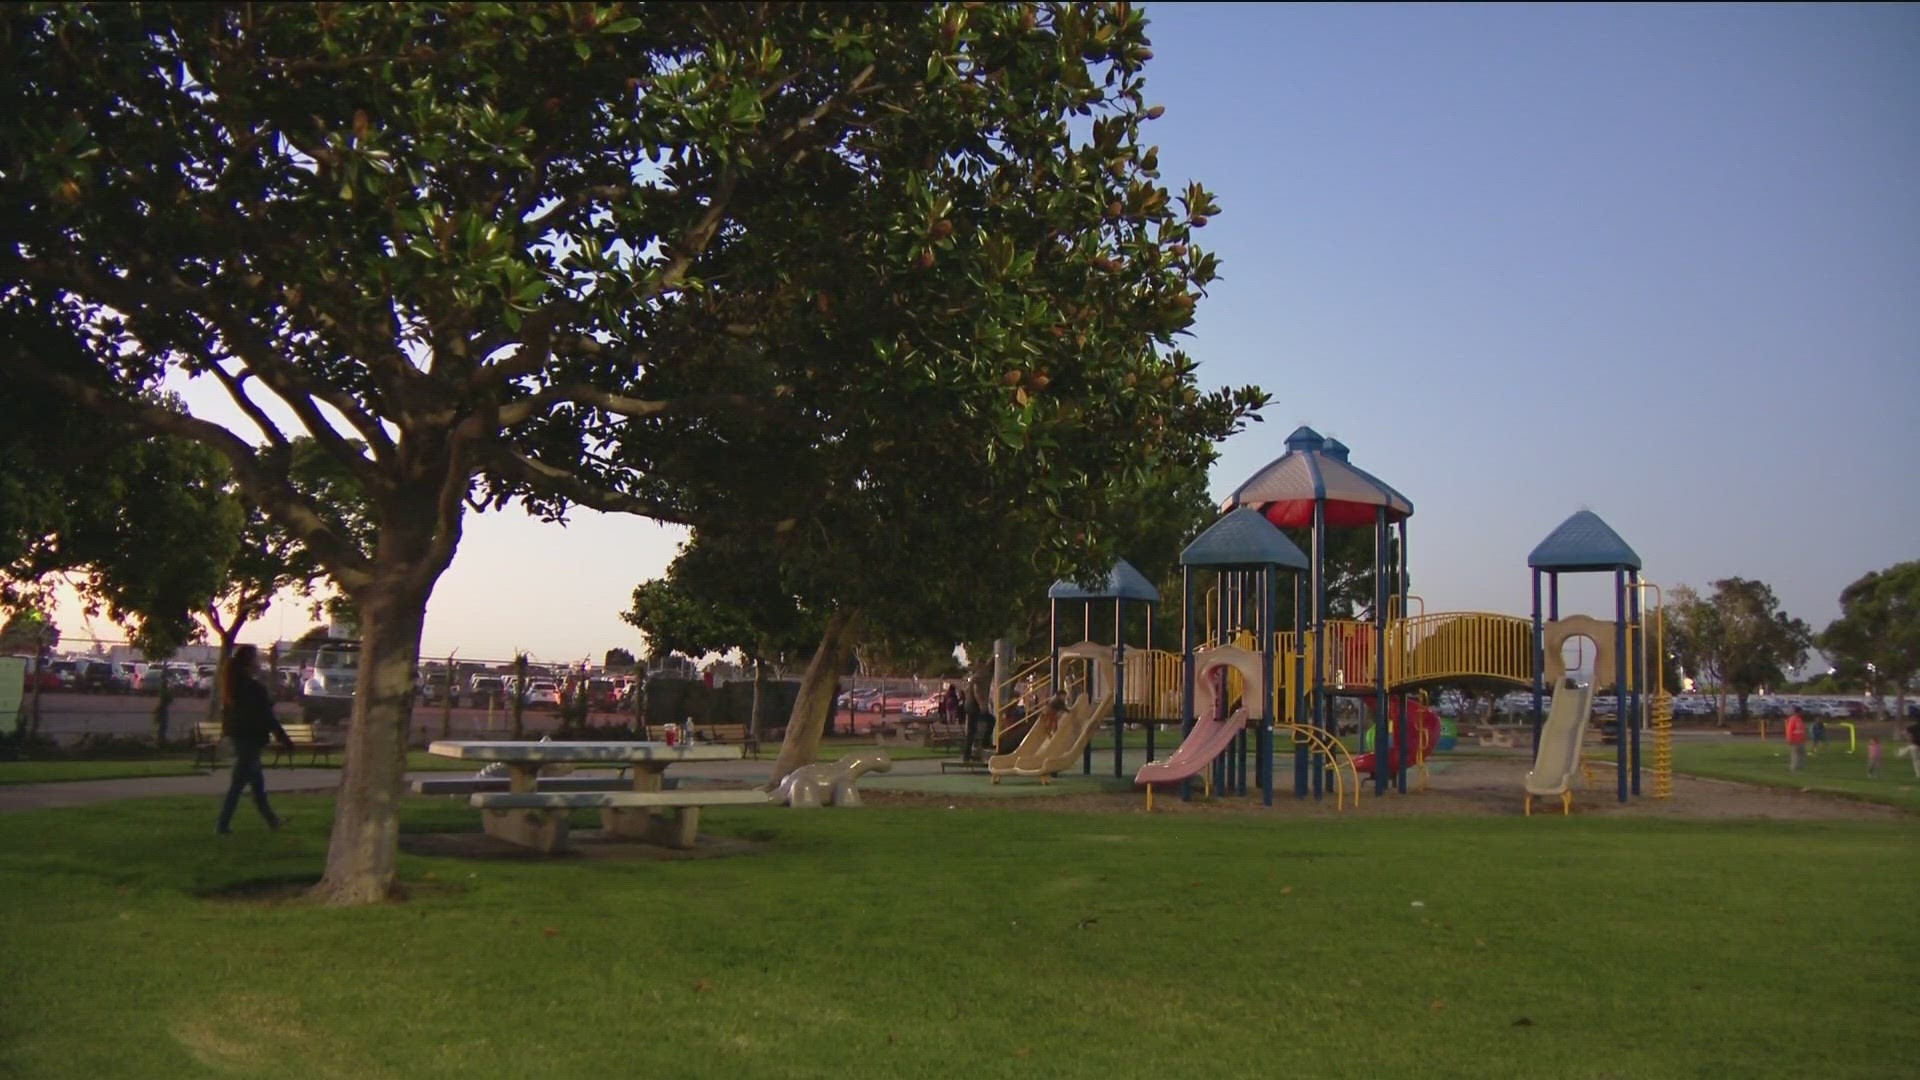 The Port of San Diego wants to bring more amenities and events to three parks in the South Bay and one of those is Pepper Park in National City.